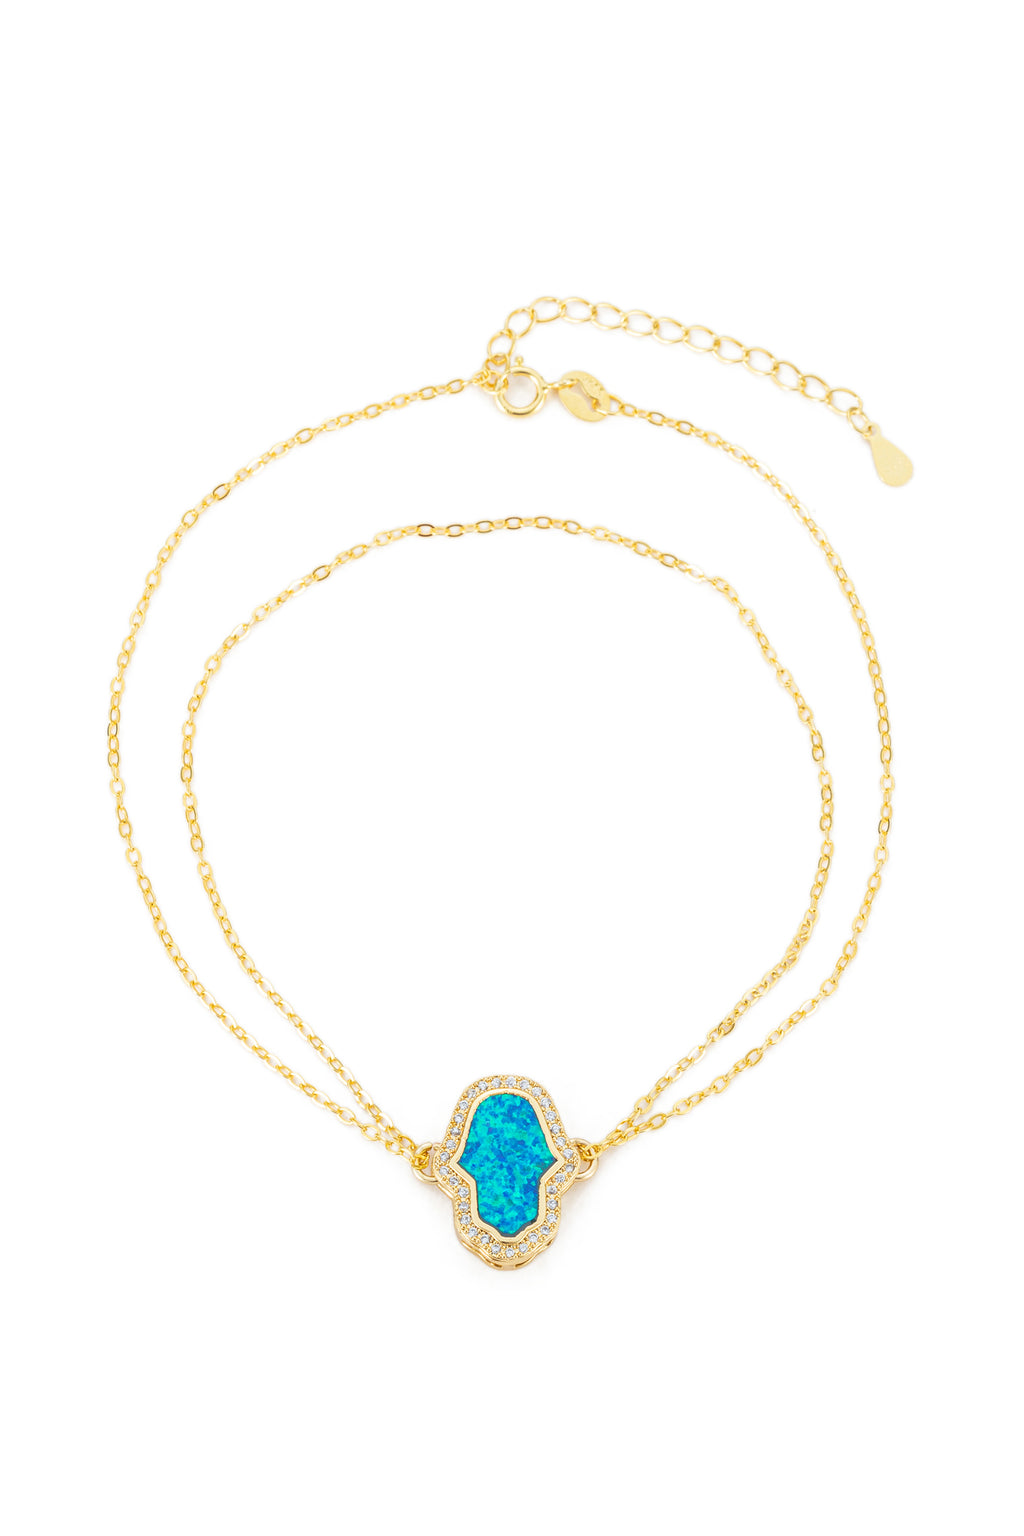 14k gold plated sterling silver hamsa hand bracelet studded with CZ crystals and a blue opal charm.